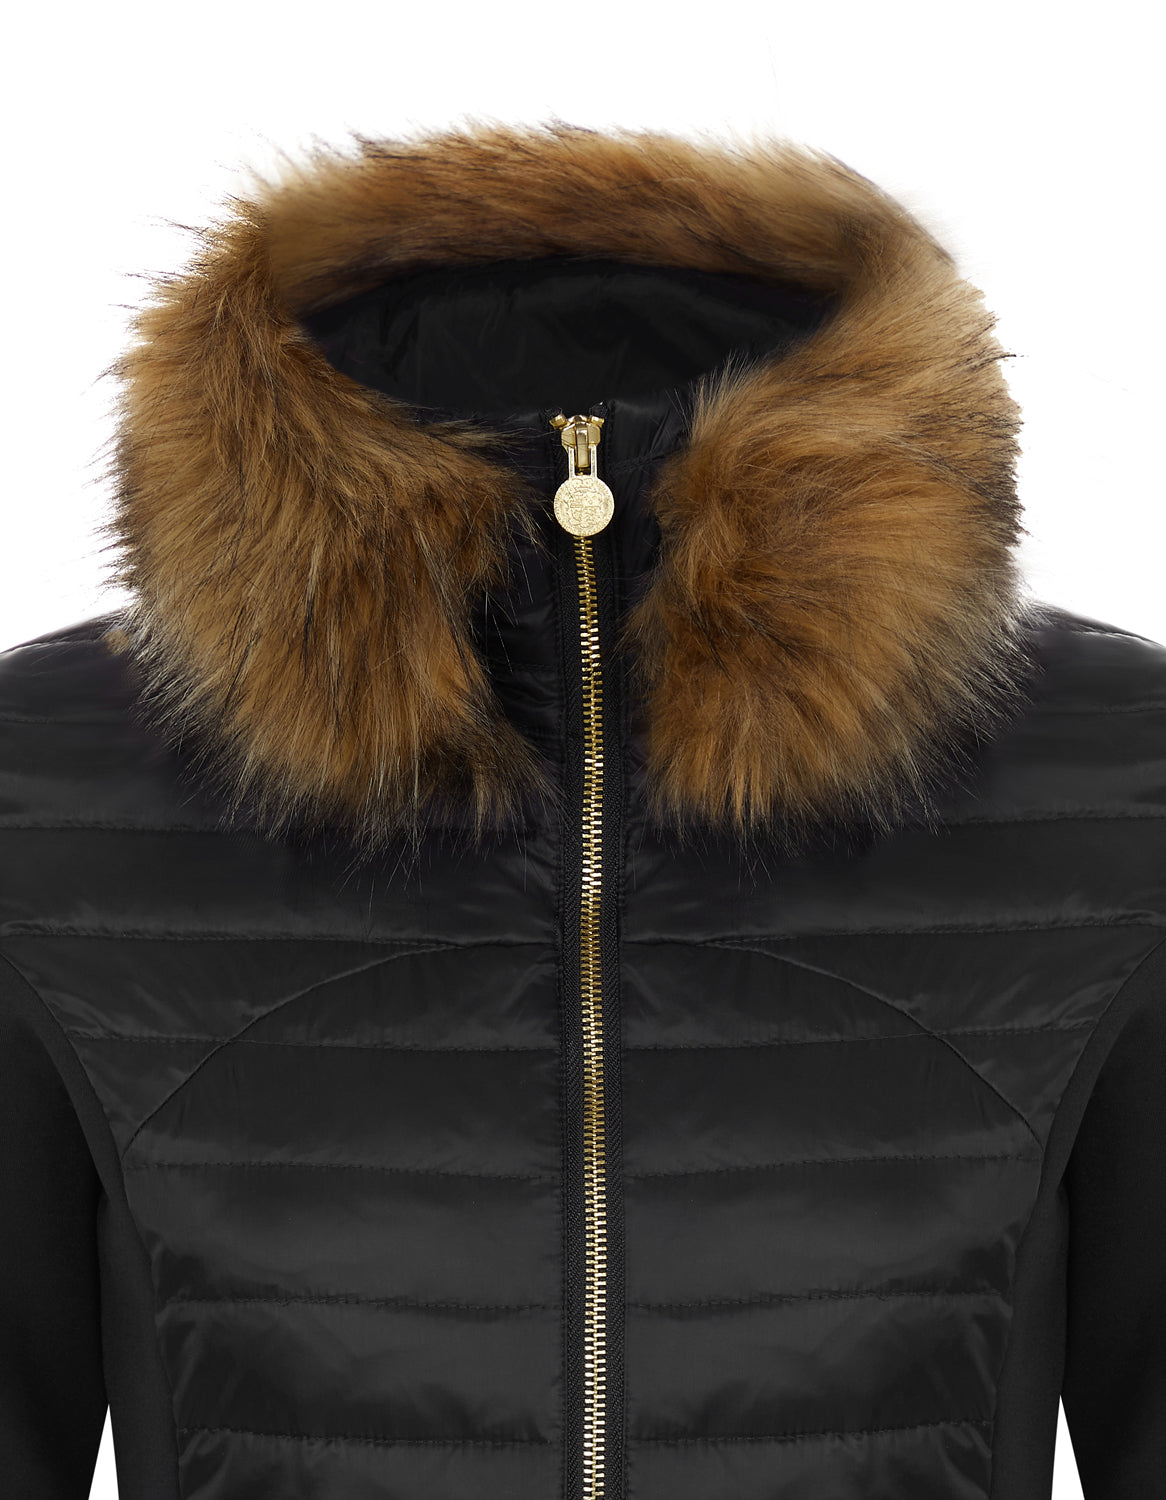 Close up neck detail of women's black puffer jacket showing the detachable faux fur collar and gold branded zip